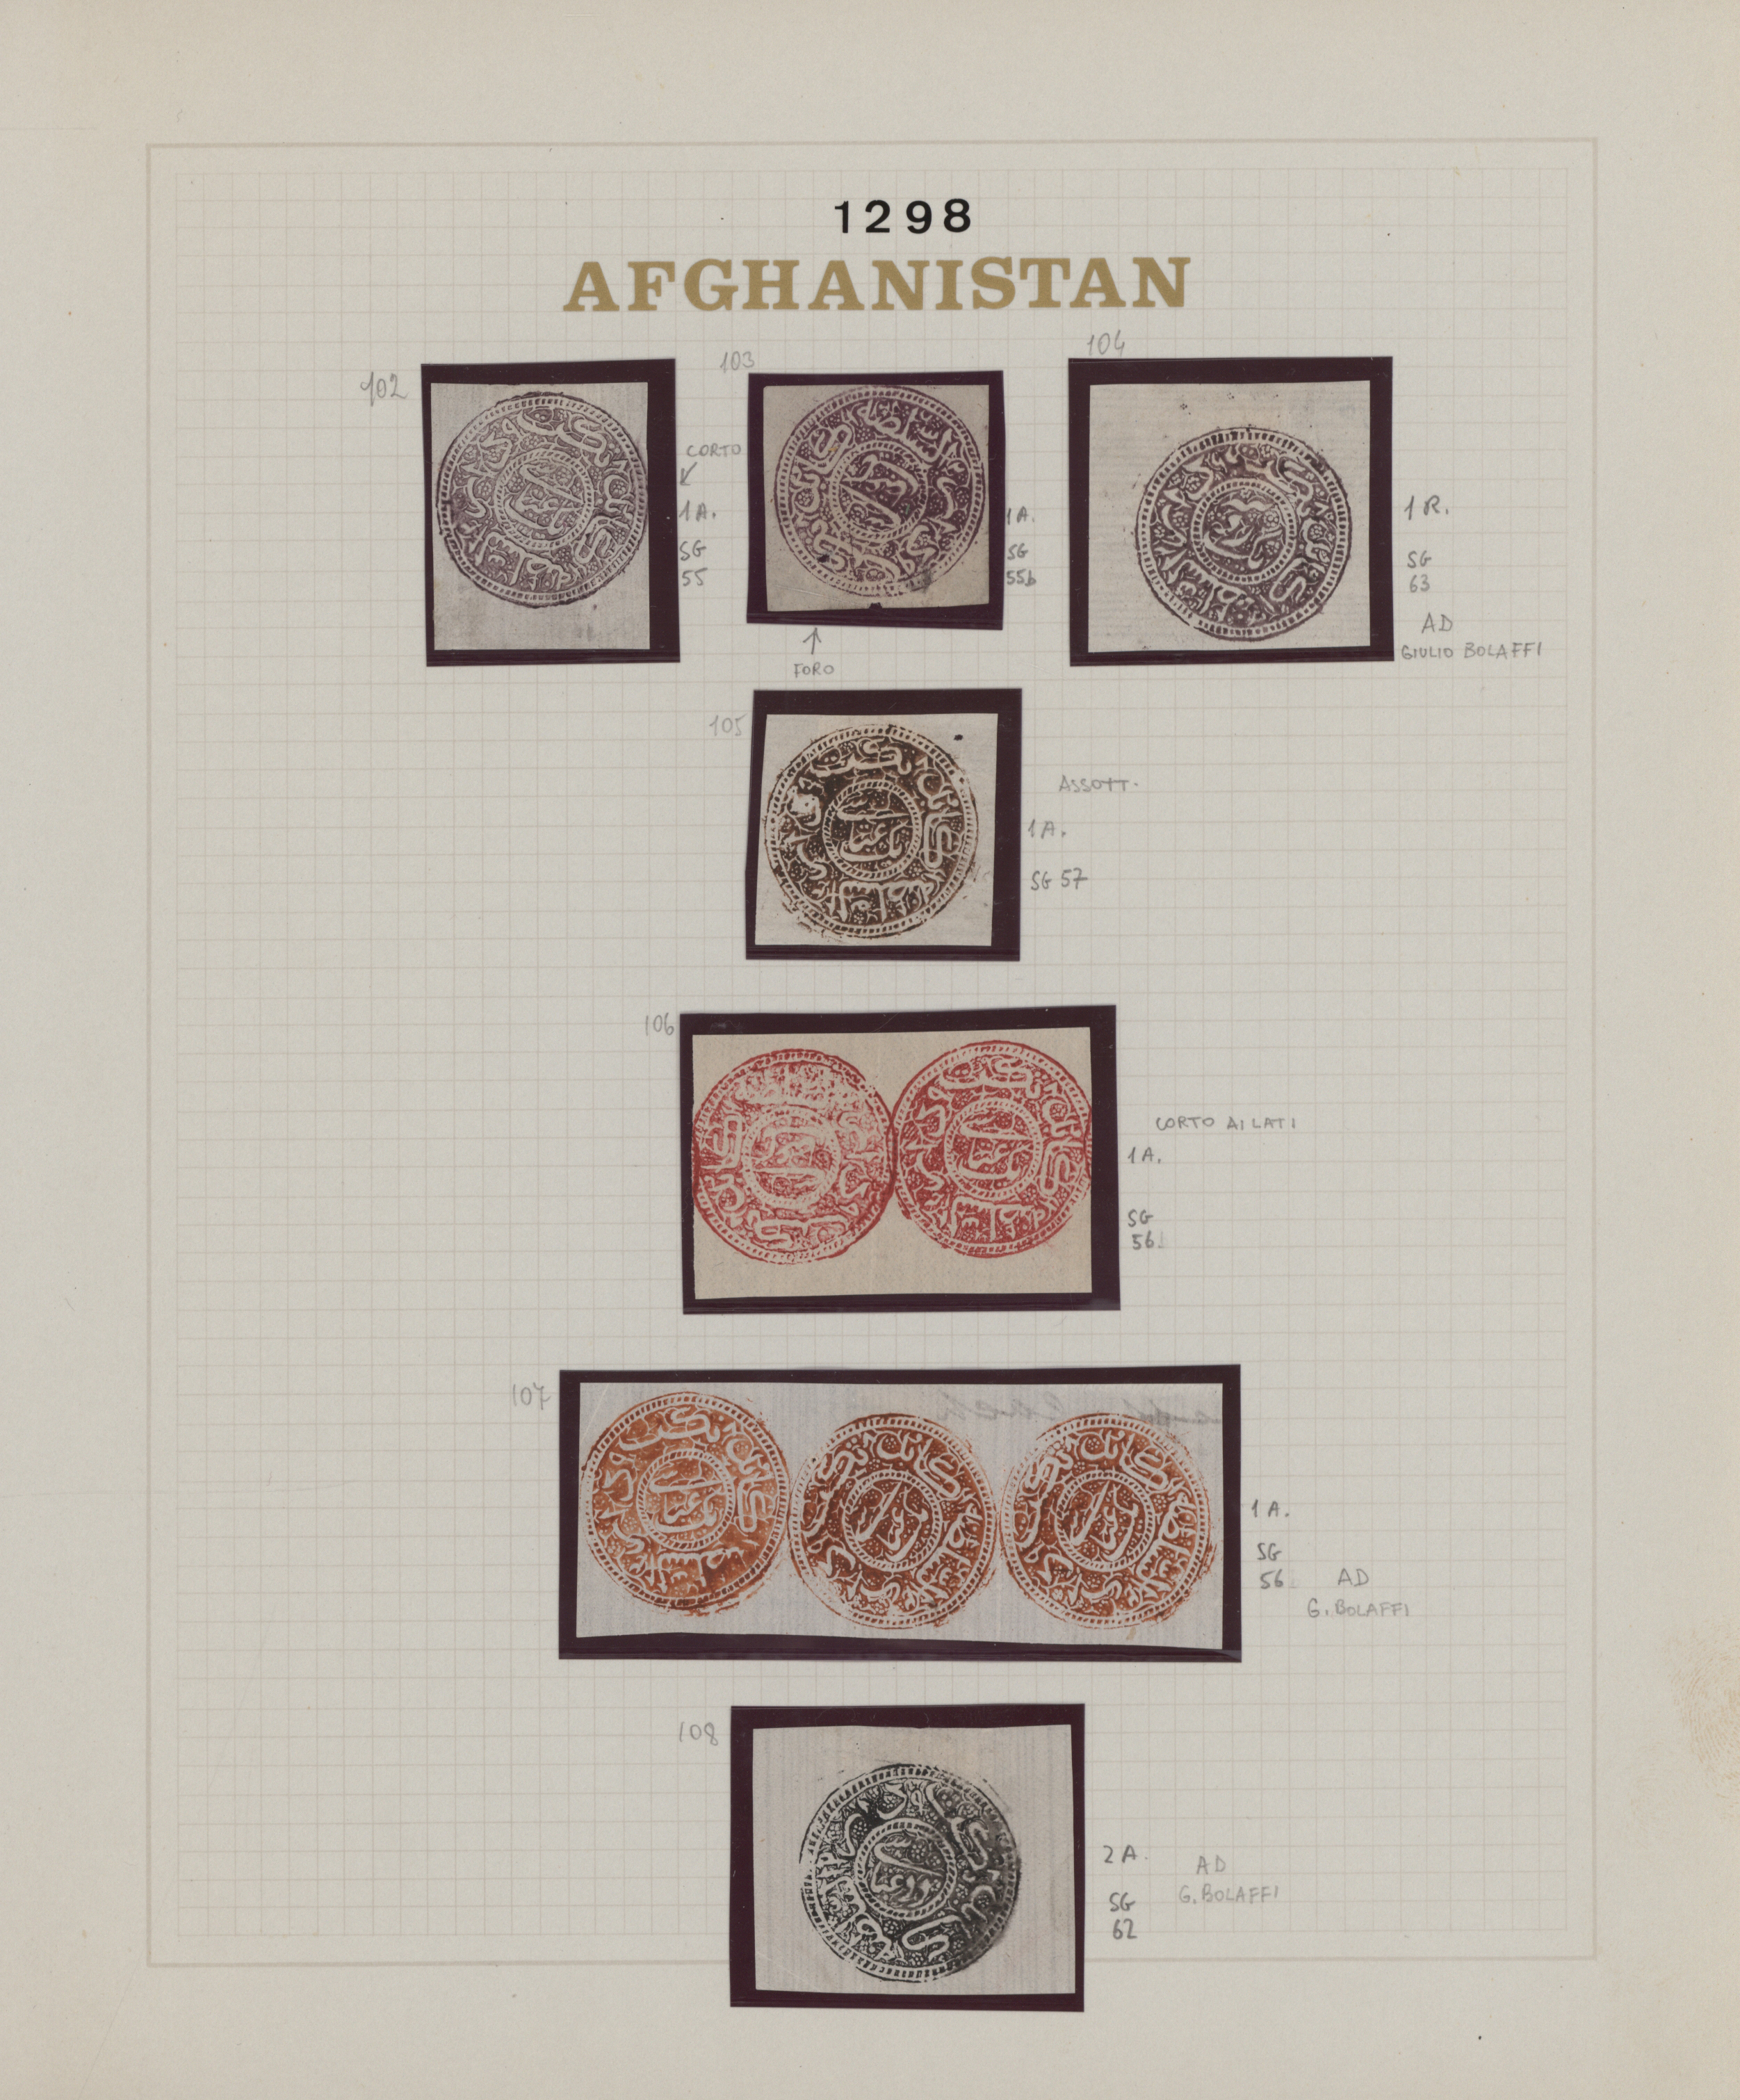 Lot 09037 - Afghanistan  -  Auktionshaus Christoph Gärtner GmbH & Co. KG 51th Auction - Day 4